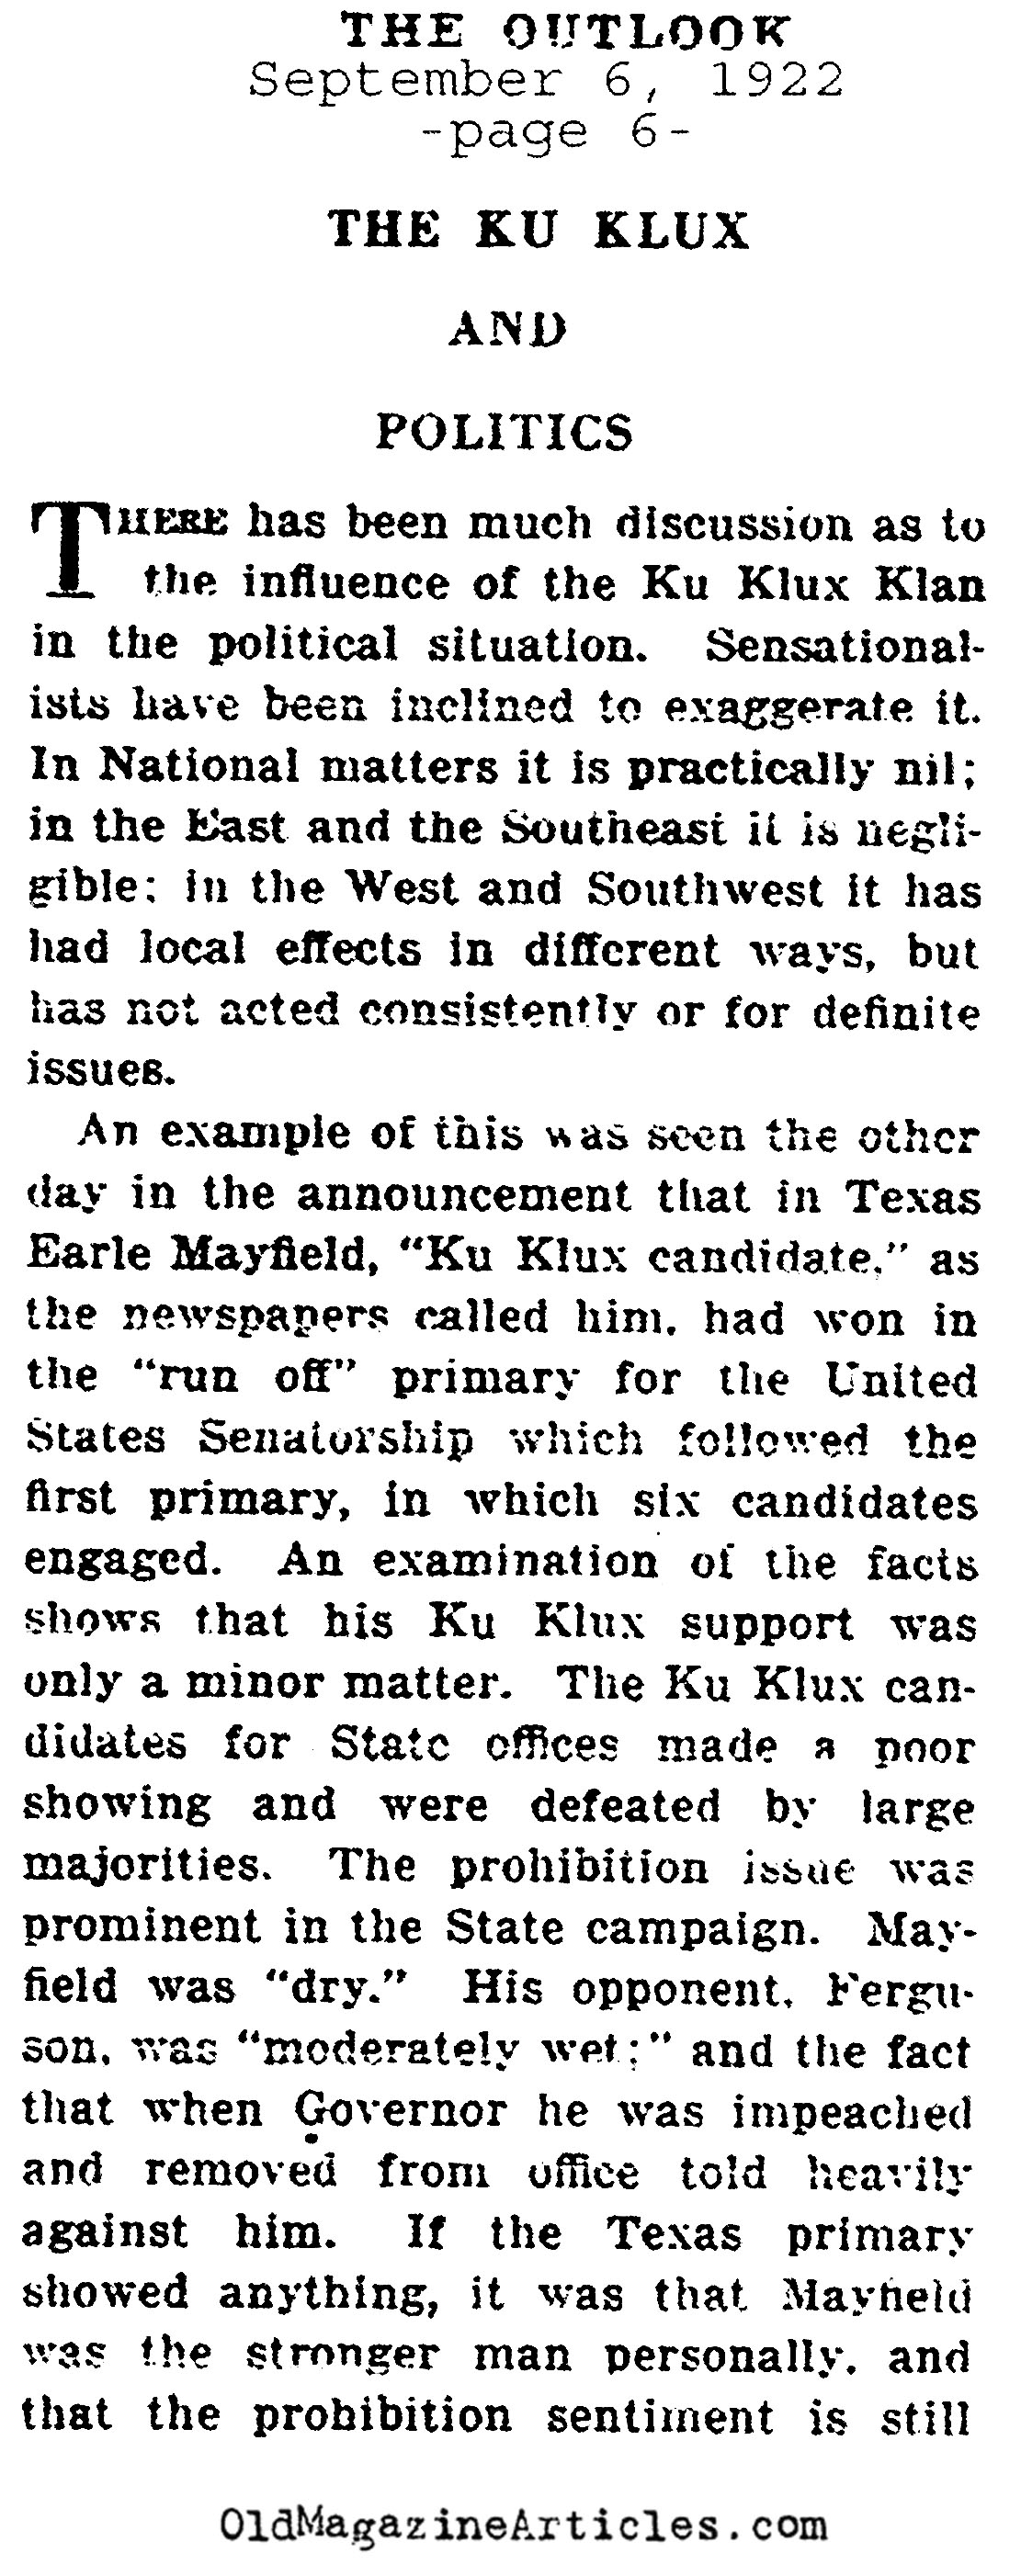 Weird Rumors About the Klan...  (The Outlook, 1922)